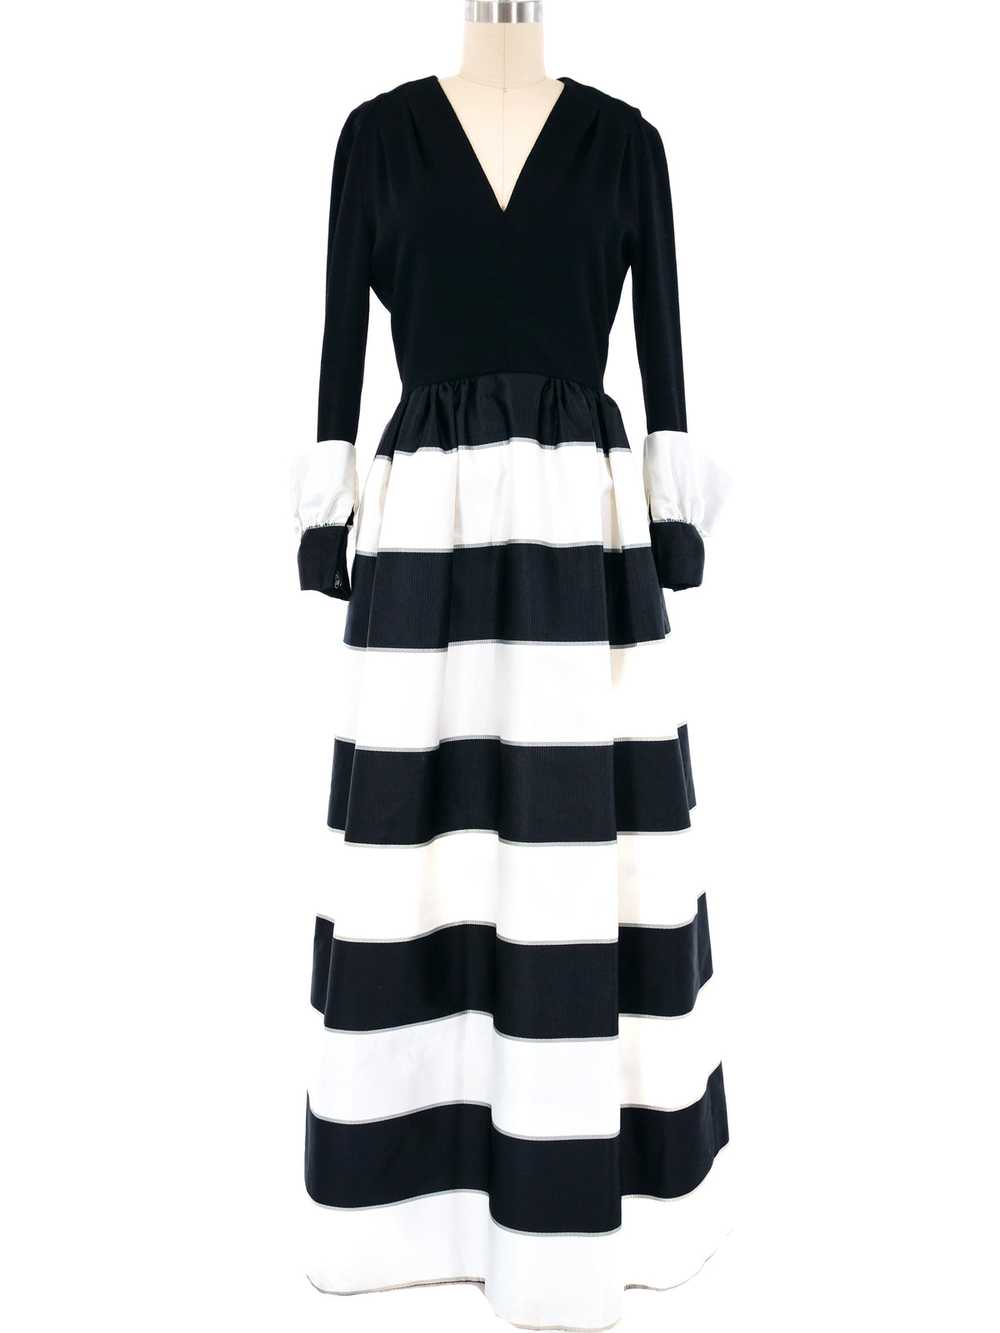 Pauline Trigere Black and White Striped Gown - image 1